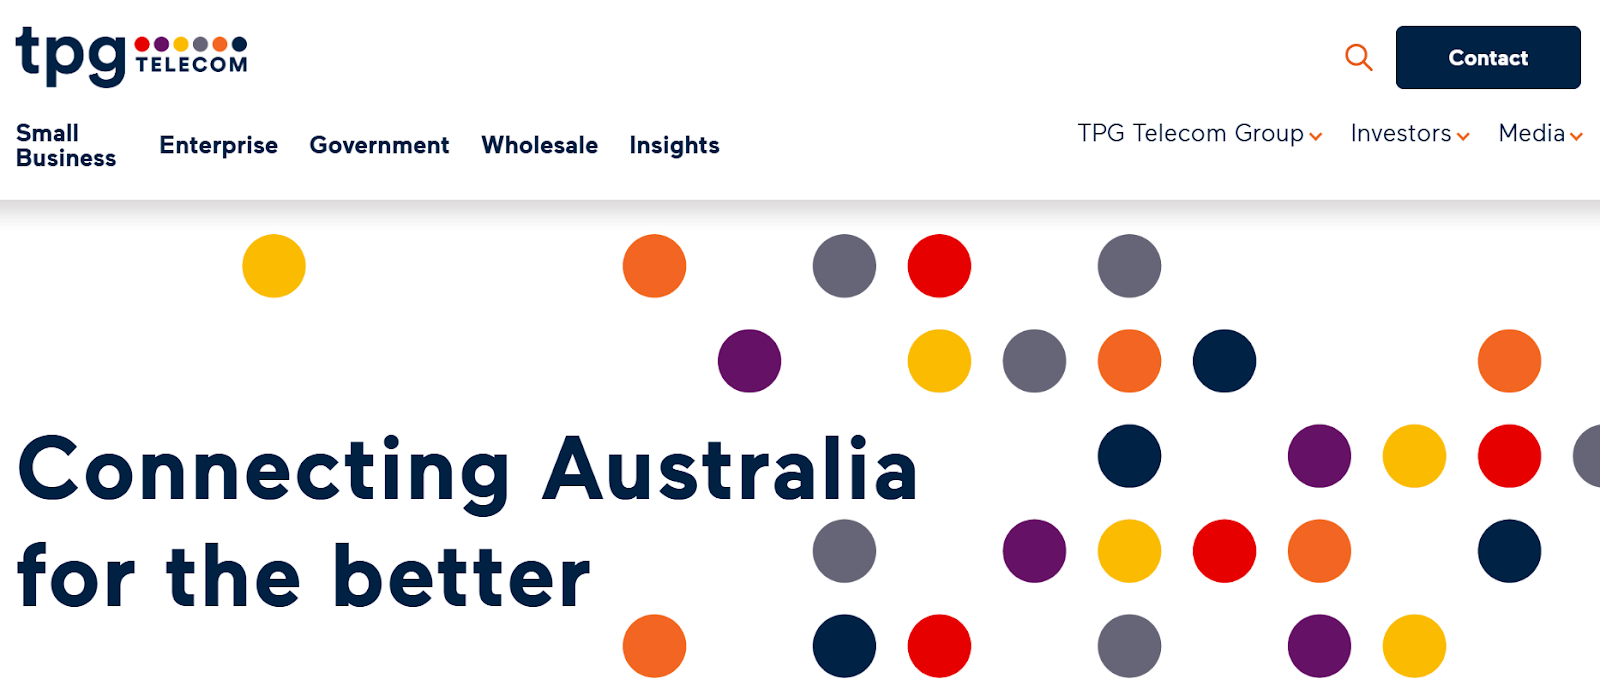 TPG Telecom website snapshot highlighting the services it offers.